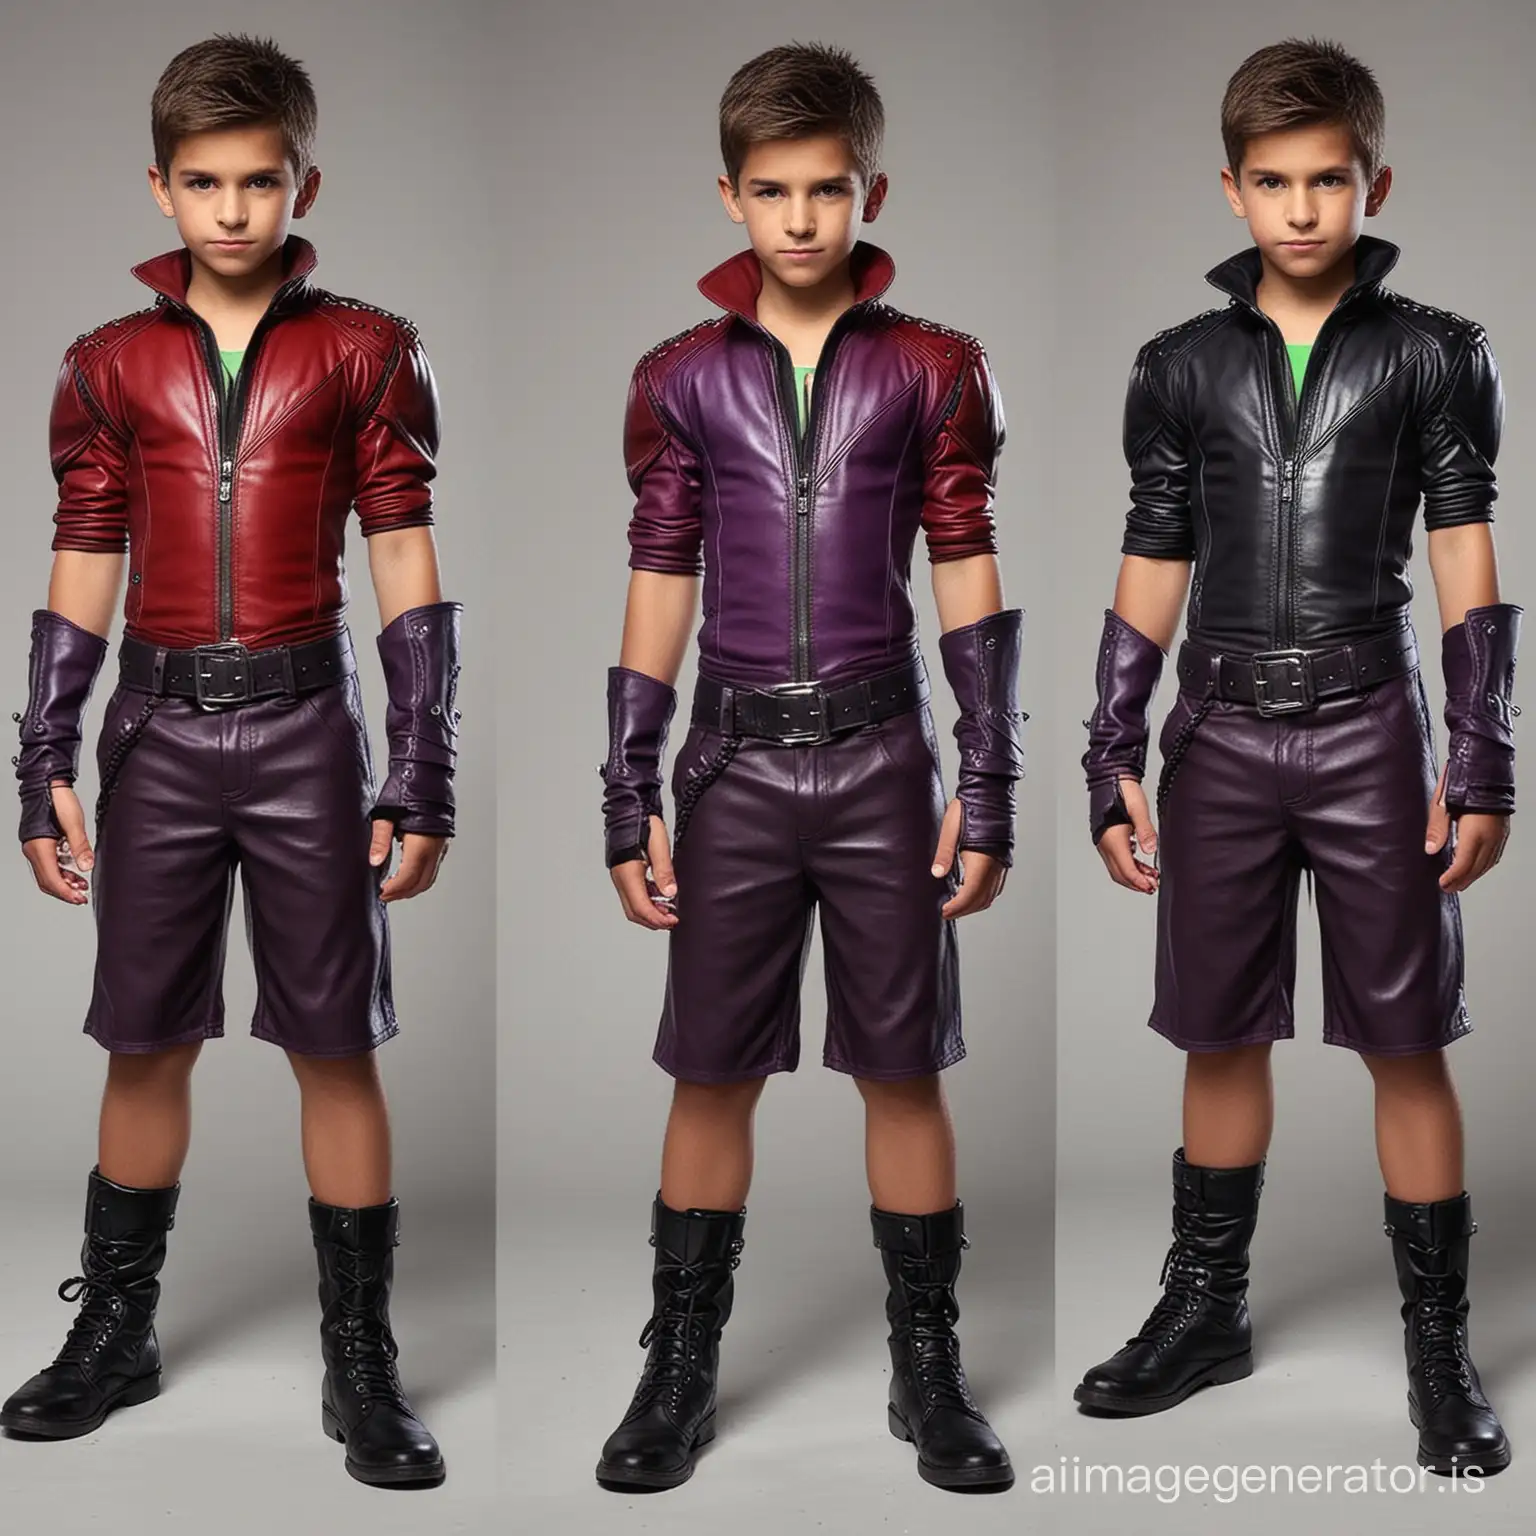 8YearOld-Boy-Villain-in-Intimidating-Purple-Leather-Outfit-with-Subtle-Red-and-Green-Accents